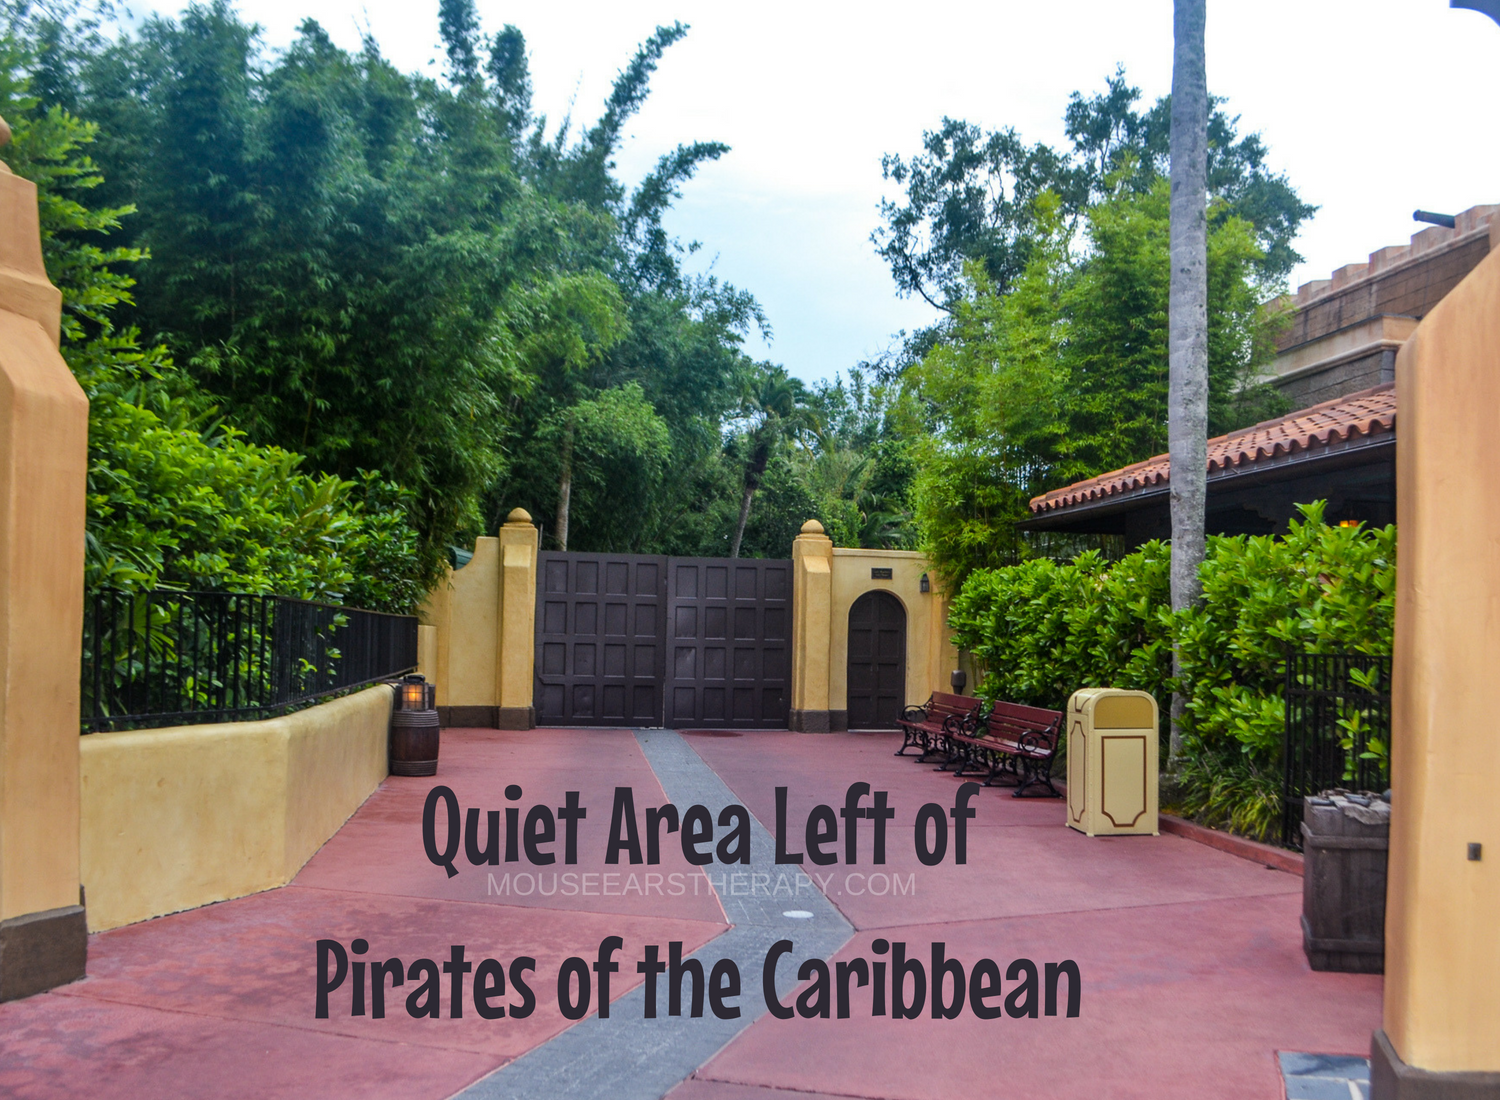 The quiet space left of Pirates of the Caribbean is a great sensory break area in Disney's Magic Kingdom